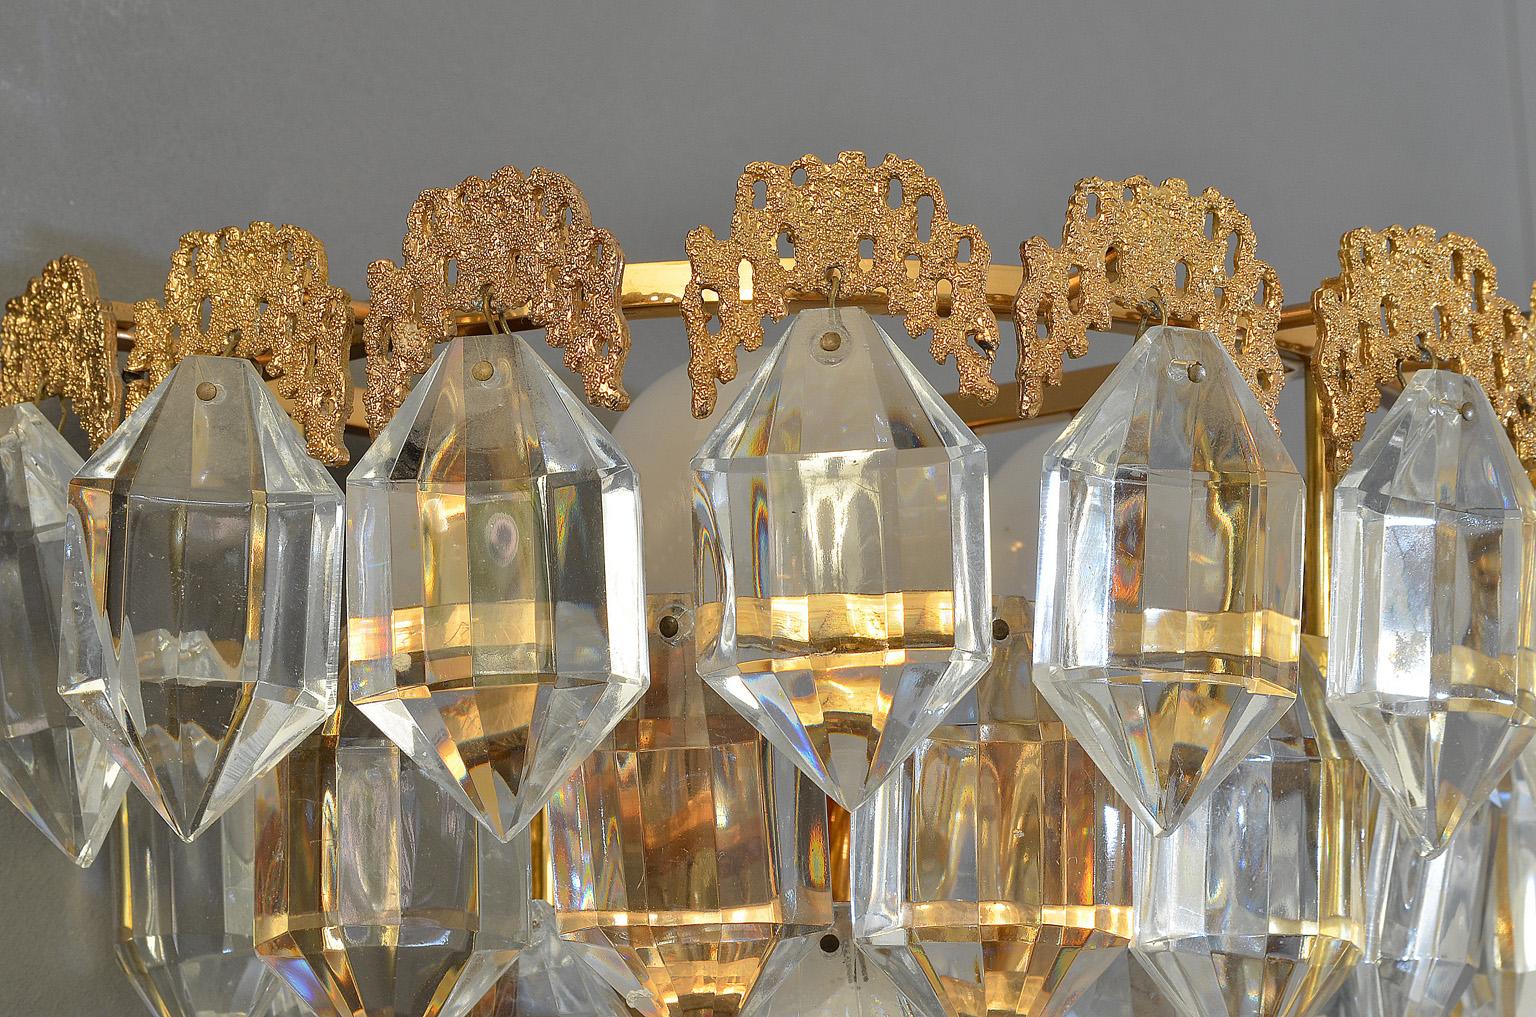 Mid-20th Century Pair of Sconces from Bakalowits, Austria 1960s, Gilt Brass and Faceted Glass